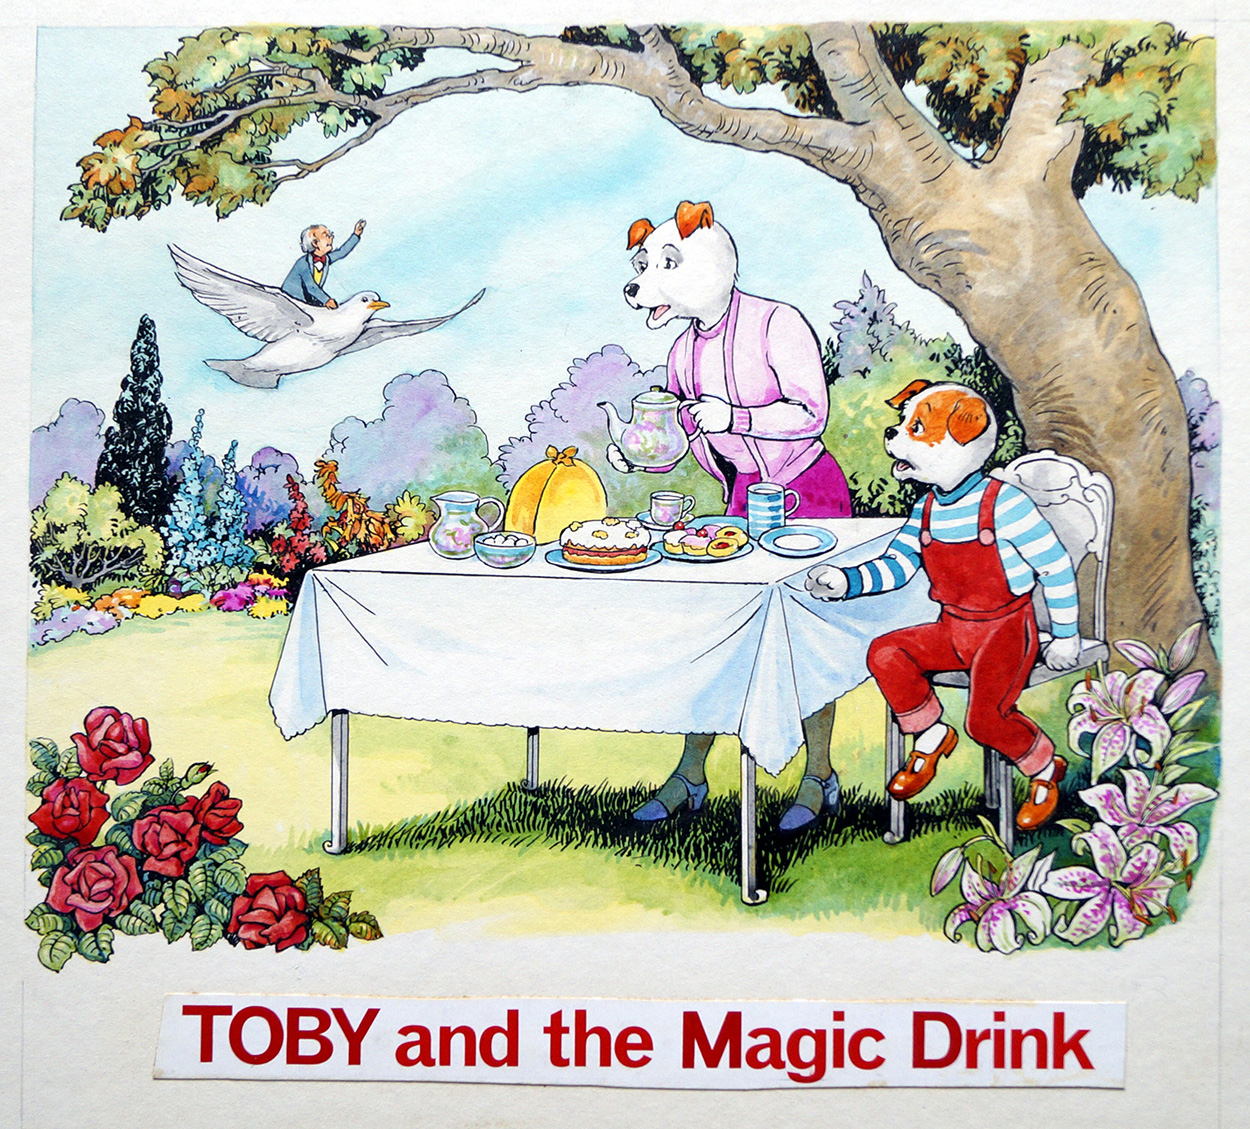 Toby and the Magic Drink (Original) art by Doris White Art at The Illustration Art Gallery